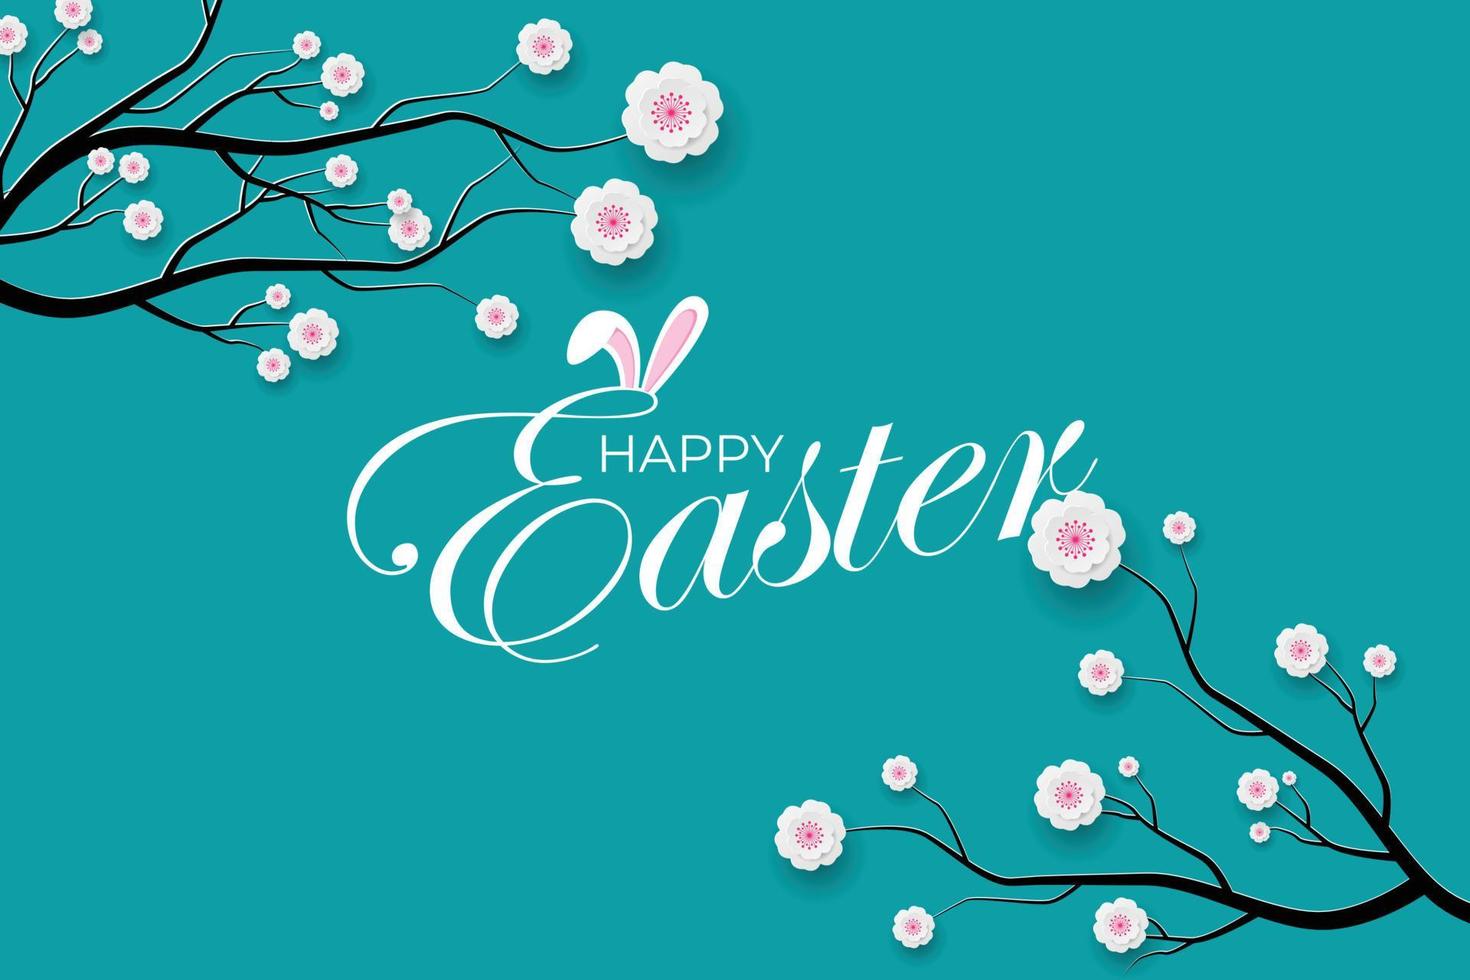 Happy Easter banner. Holiday concept design for greeting card, banner, poster, flyer, web. Happy Easter floral blue background. Paper cut out art style, vector illustration